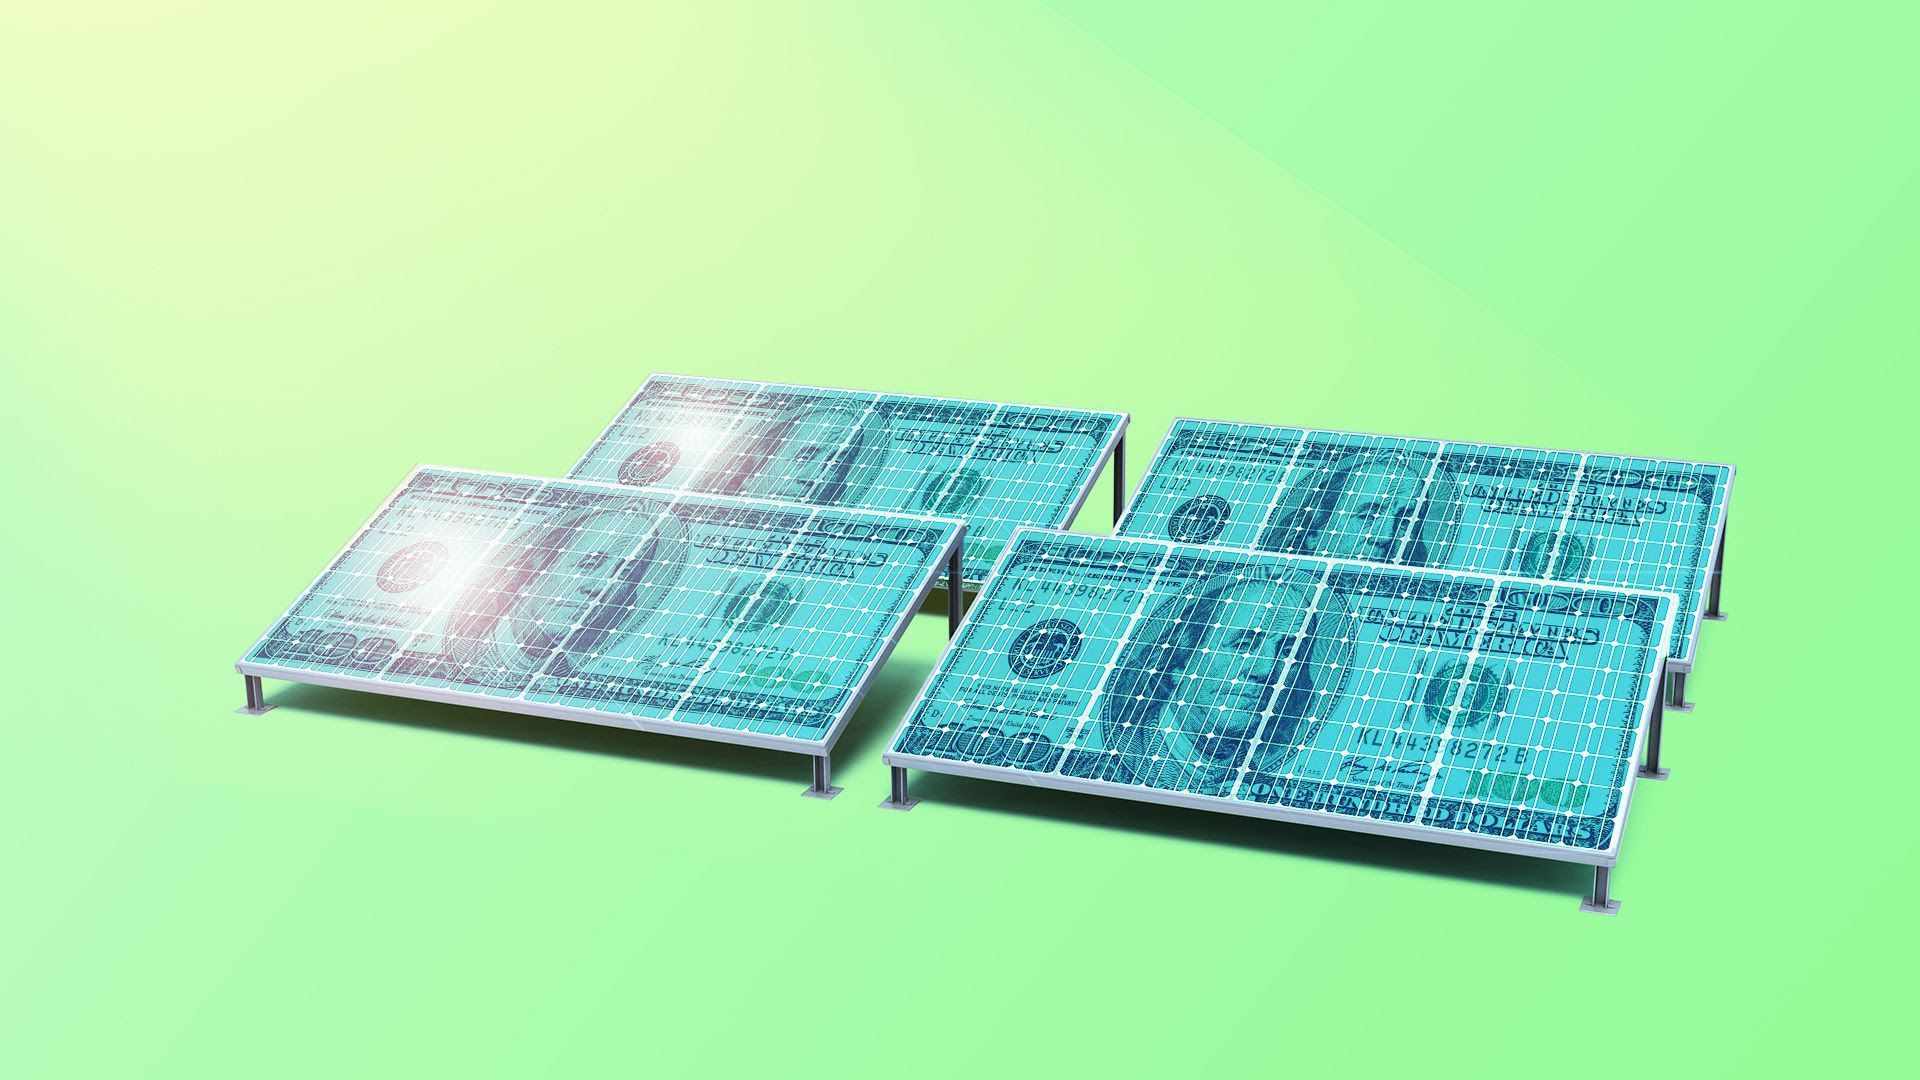 In this illustration, solar panels are designed to look like 100 dollar bills.